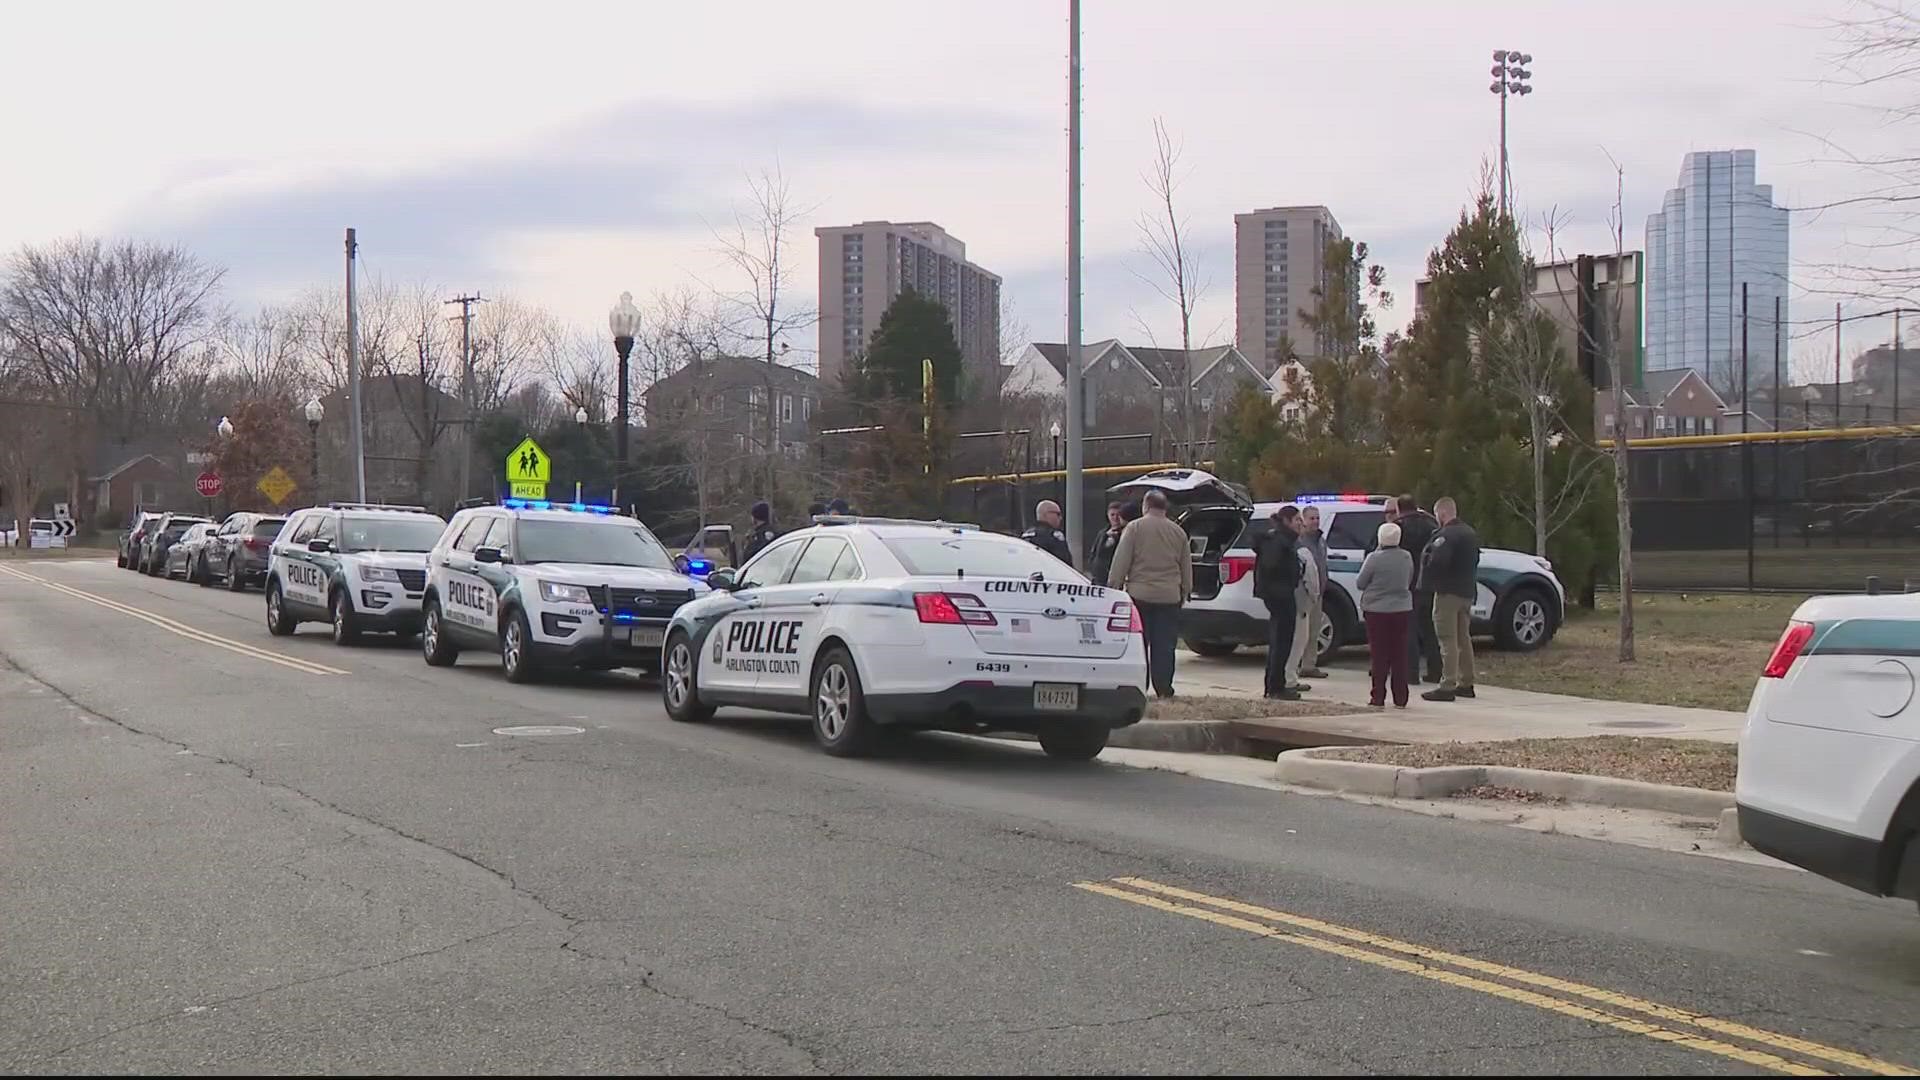 Students at Wakefield High School in Arlington, Virginia, returned to class Monday as the school closed last week Friday due to a trespasser.